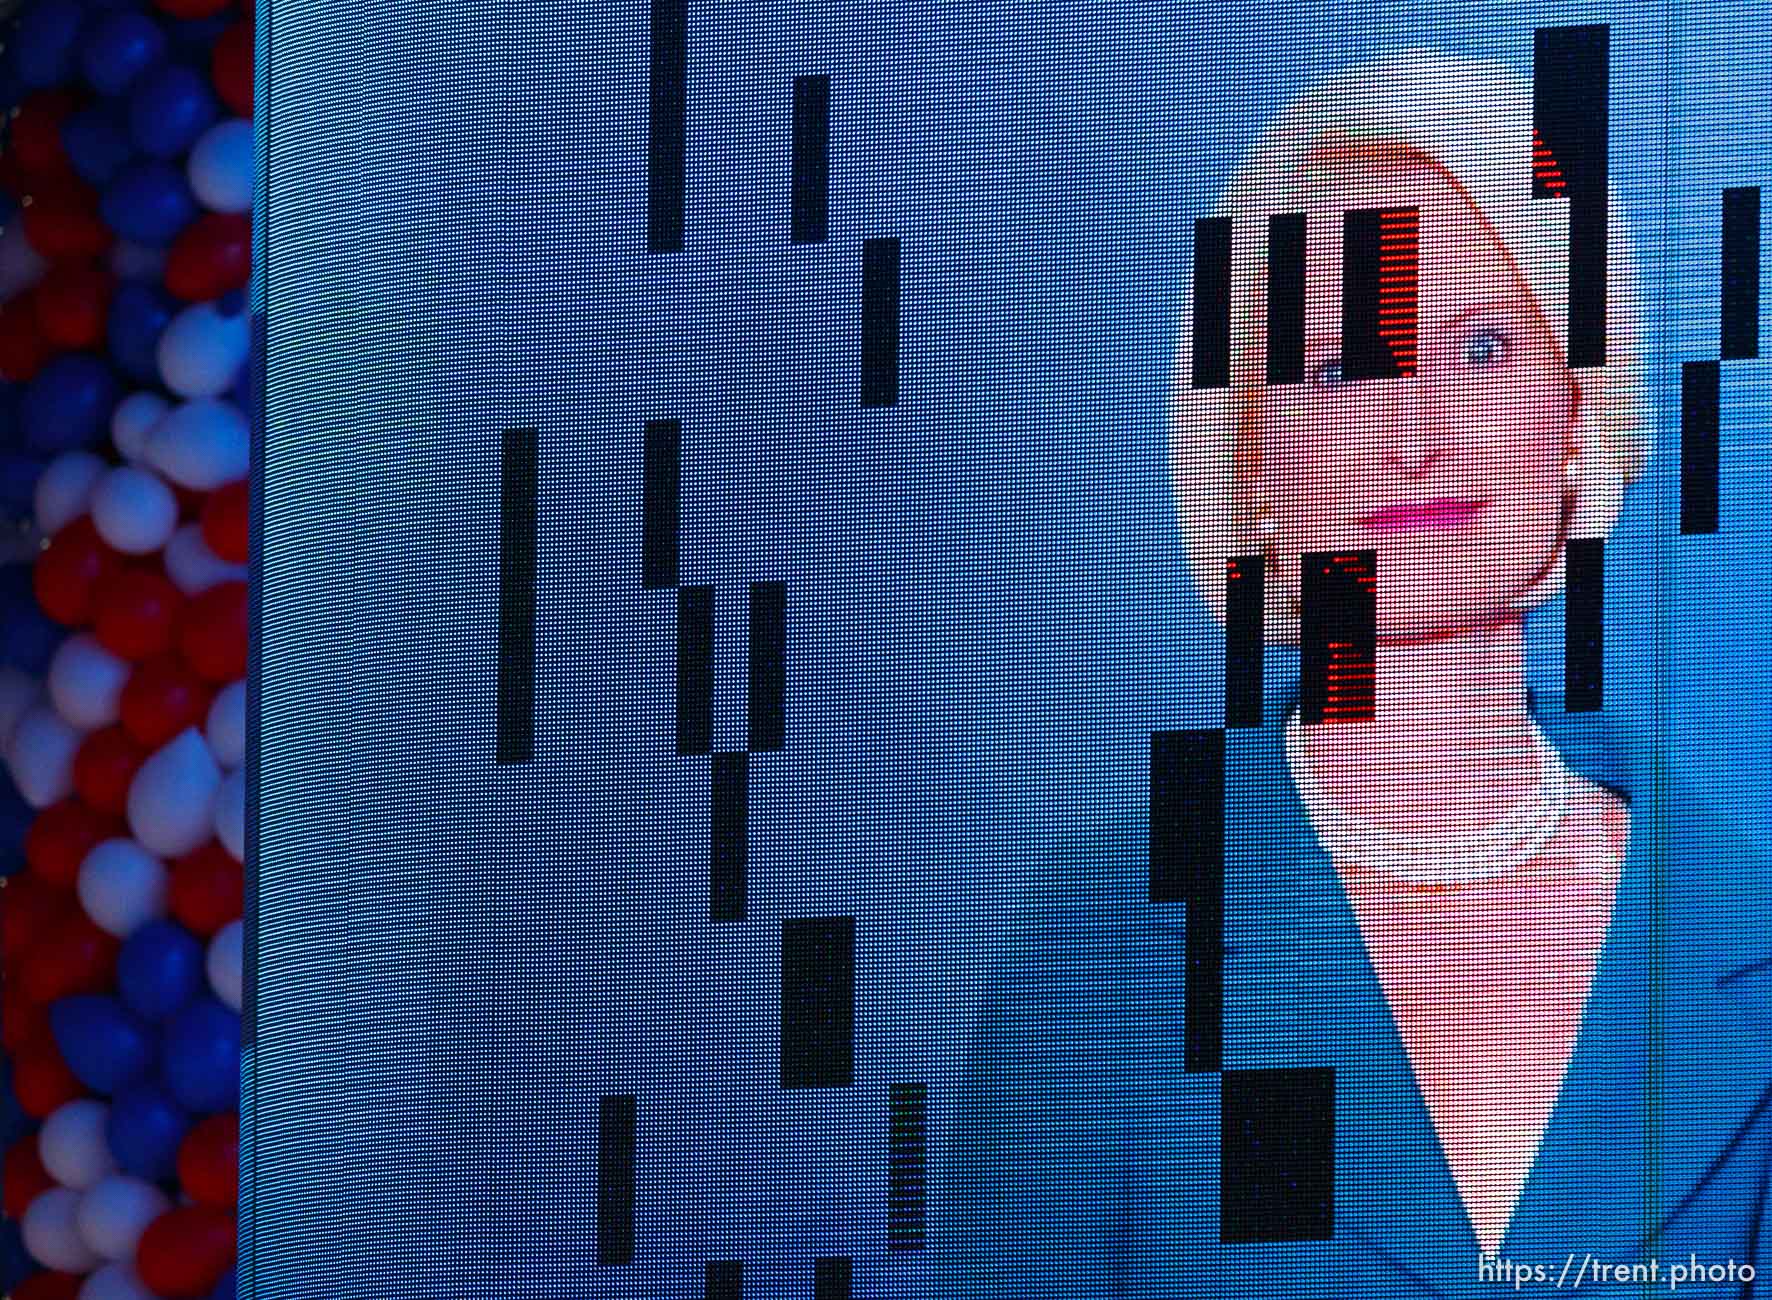 Callista and Newt Gingrich – Republican National Convention